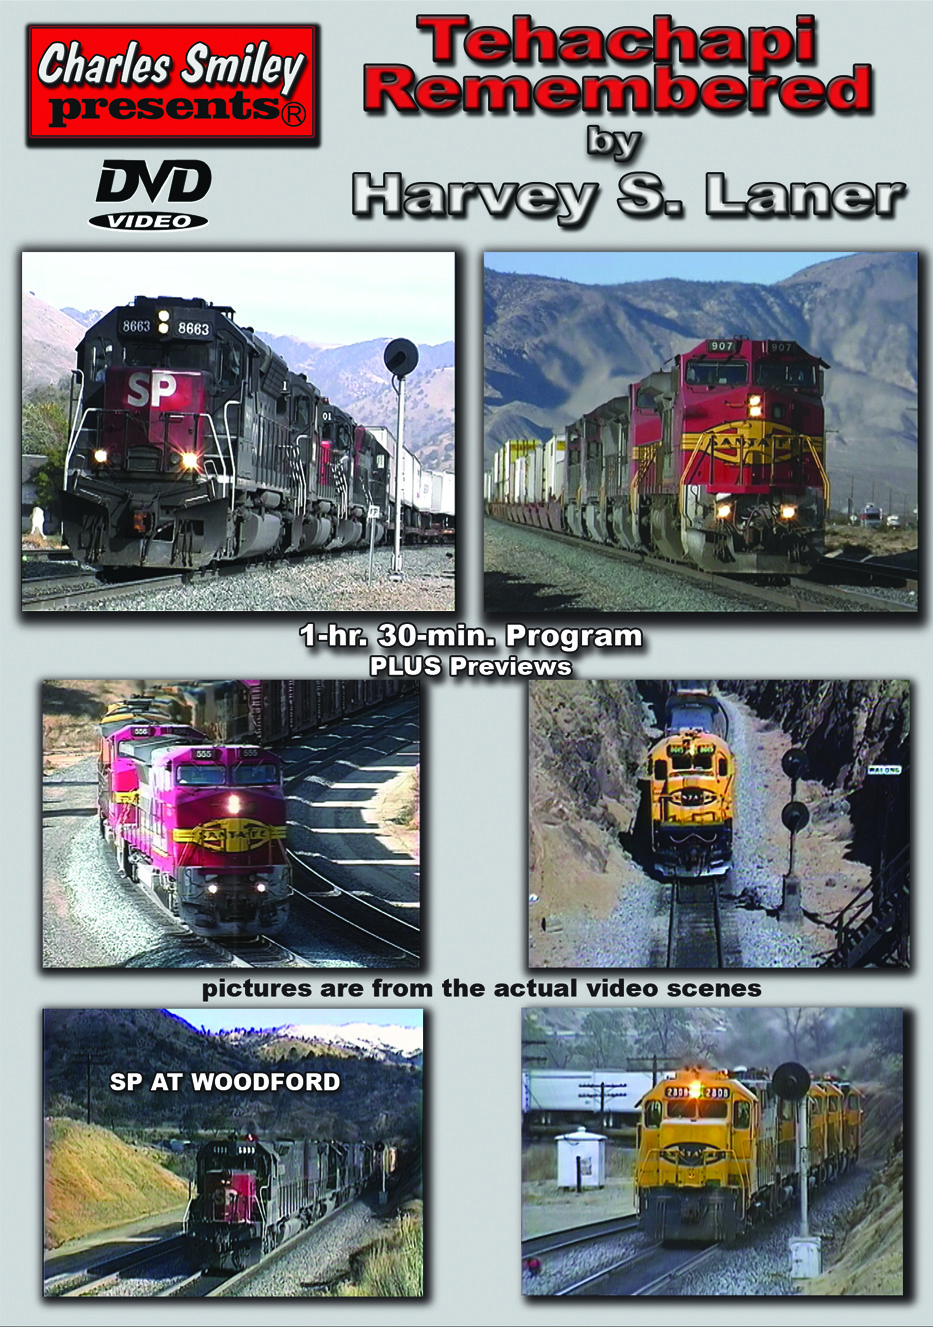   5 of 5  All I can say is - Wow! I am very pleased with this release, and feel that it ranks at the top for vintage Tehachapi footage. Charles Smiley Productions has released a number of great dvd's over the years, but this is easily my favorite. The dvd is filmed and narrated by Harvey Laner, who does an excellent job at both, and shows the progression of his camera equipment used to film, along with his videography-skills. The quality and clarity of the footage is superb. Laner had a understandable fasci